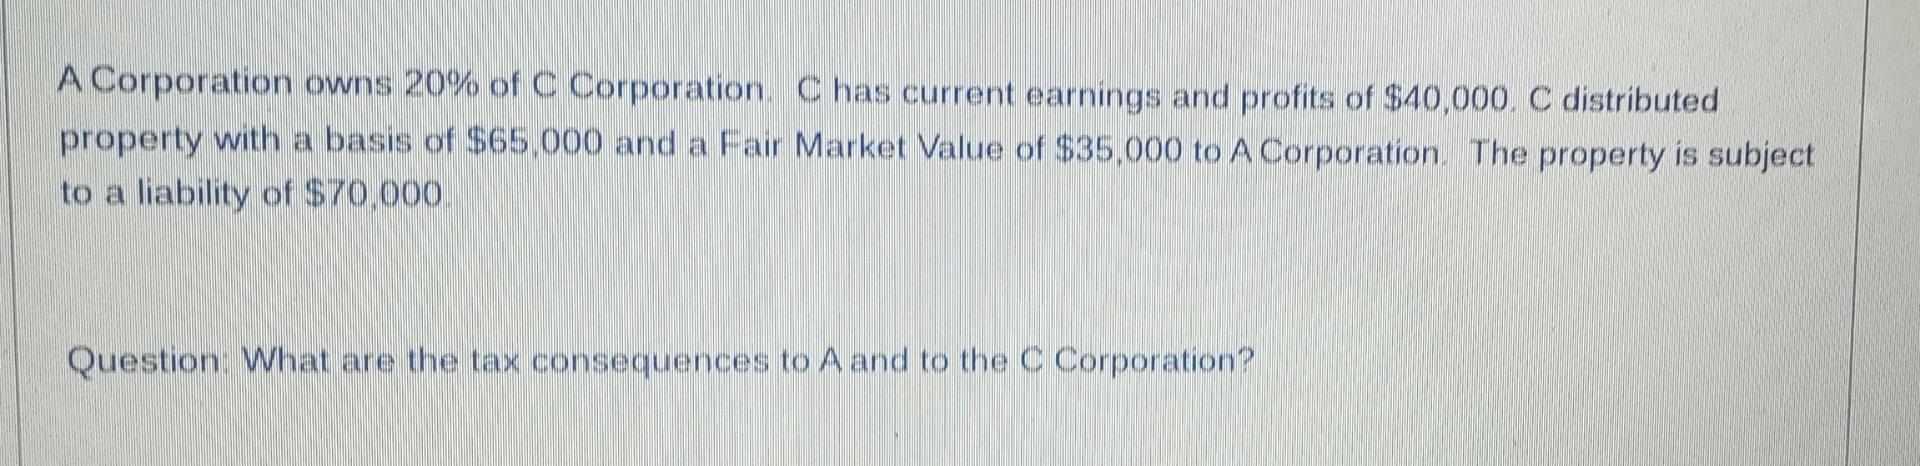 A Corporation owns 20% of C Corporation. C has current earnings and profits of $40,000. C distributed property with a basis o